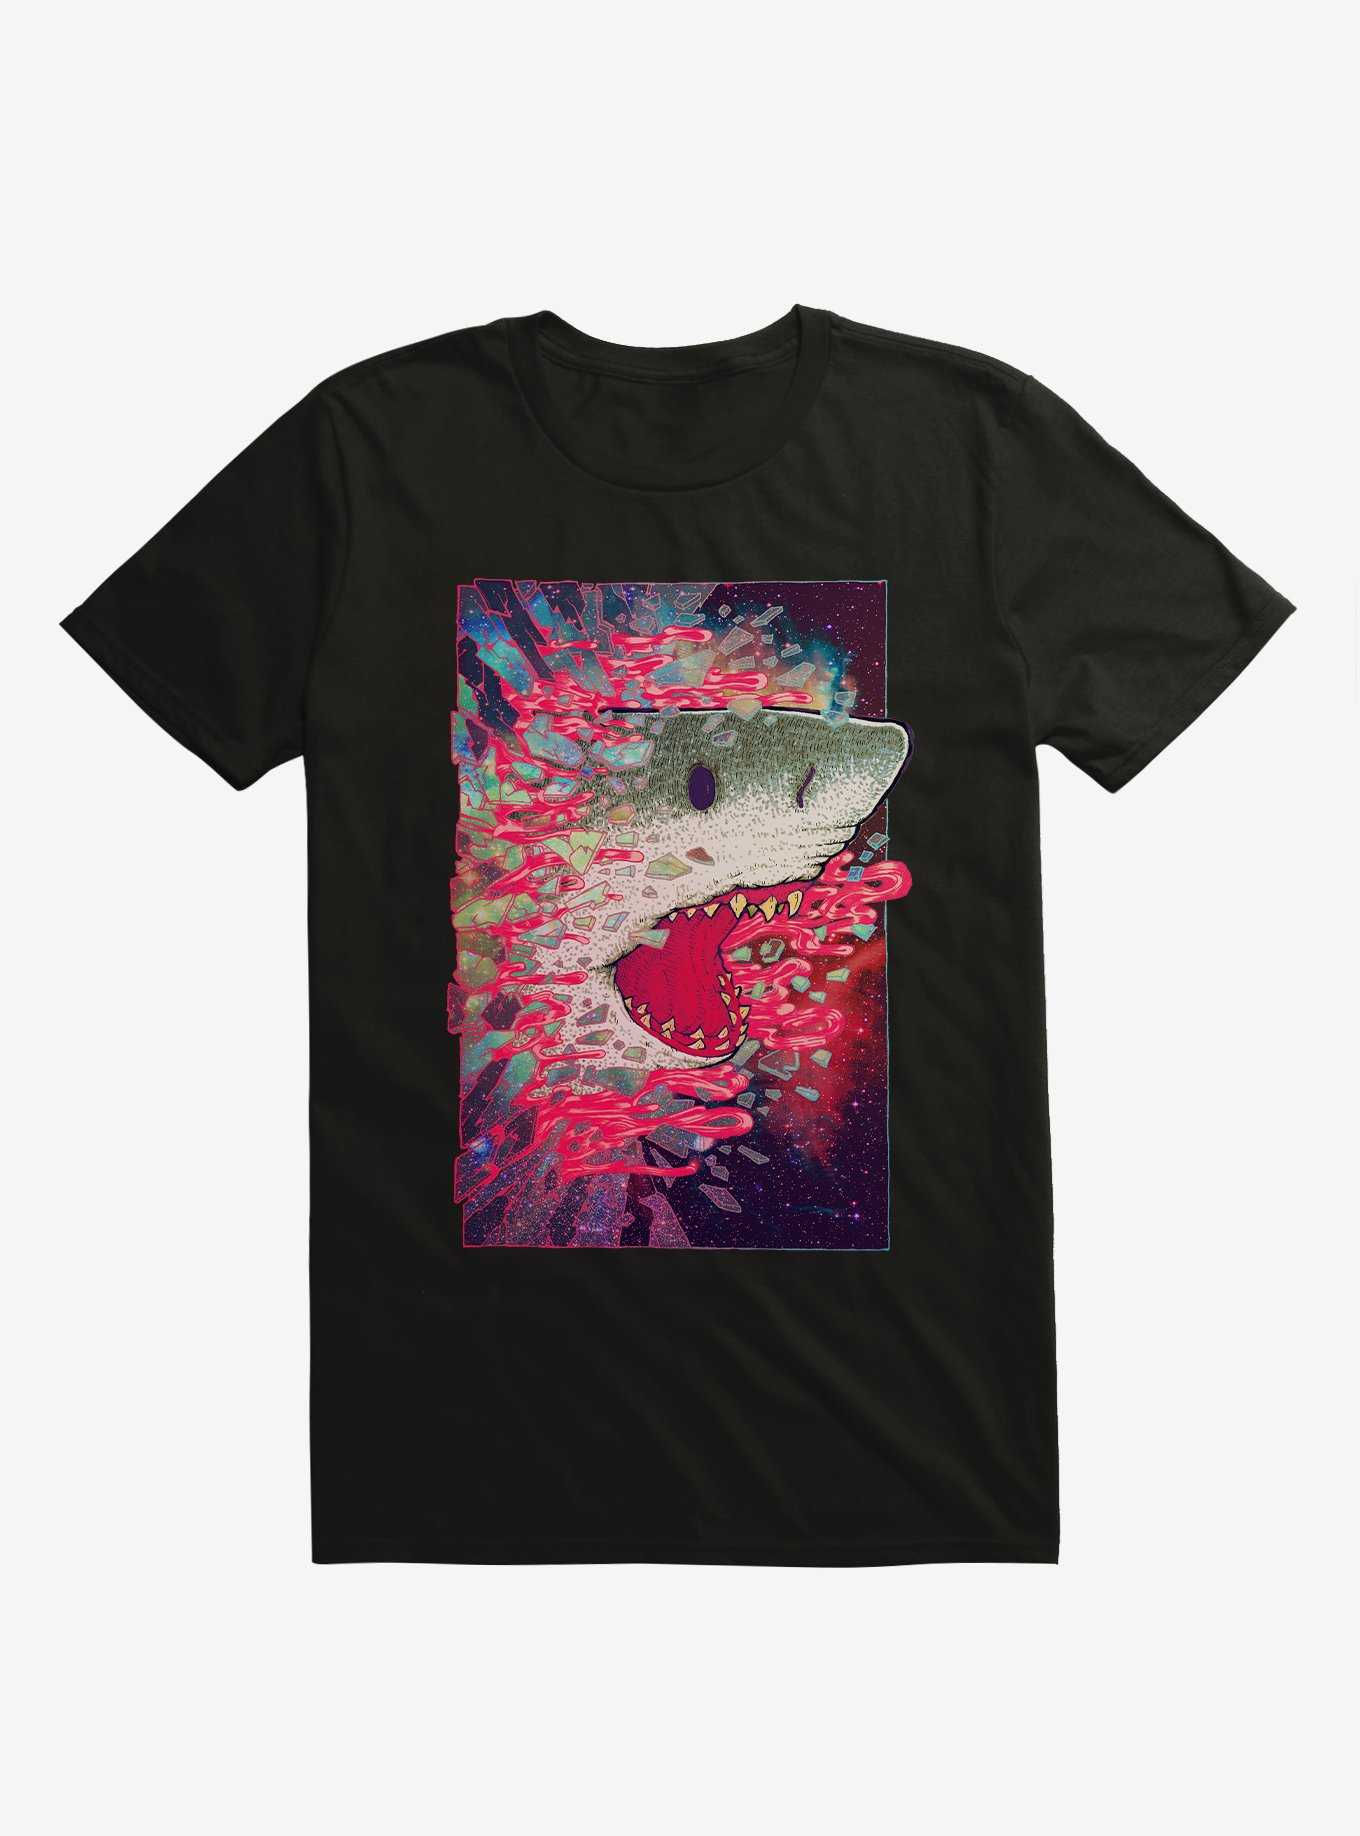 Shark From Outer Space Galaxy Black T-Shirt, , hi-res